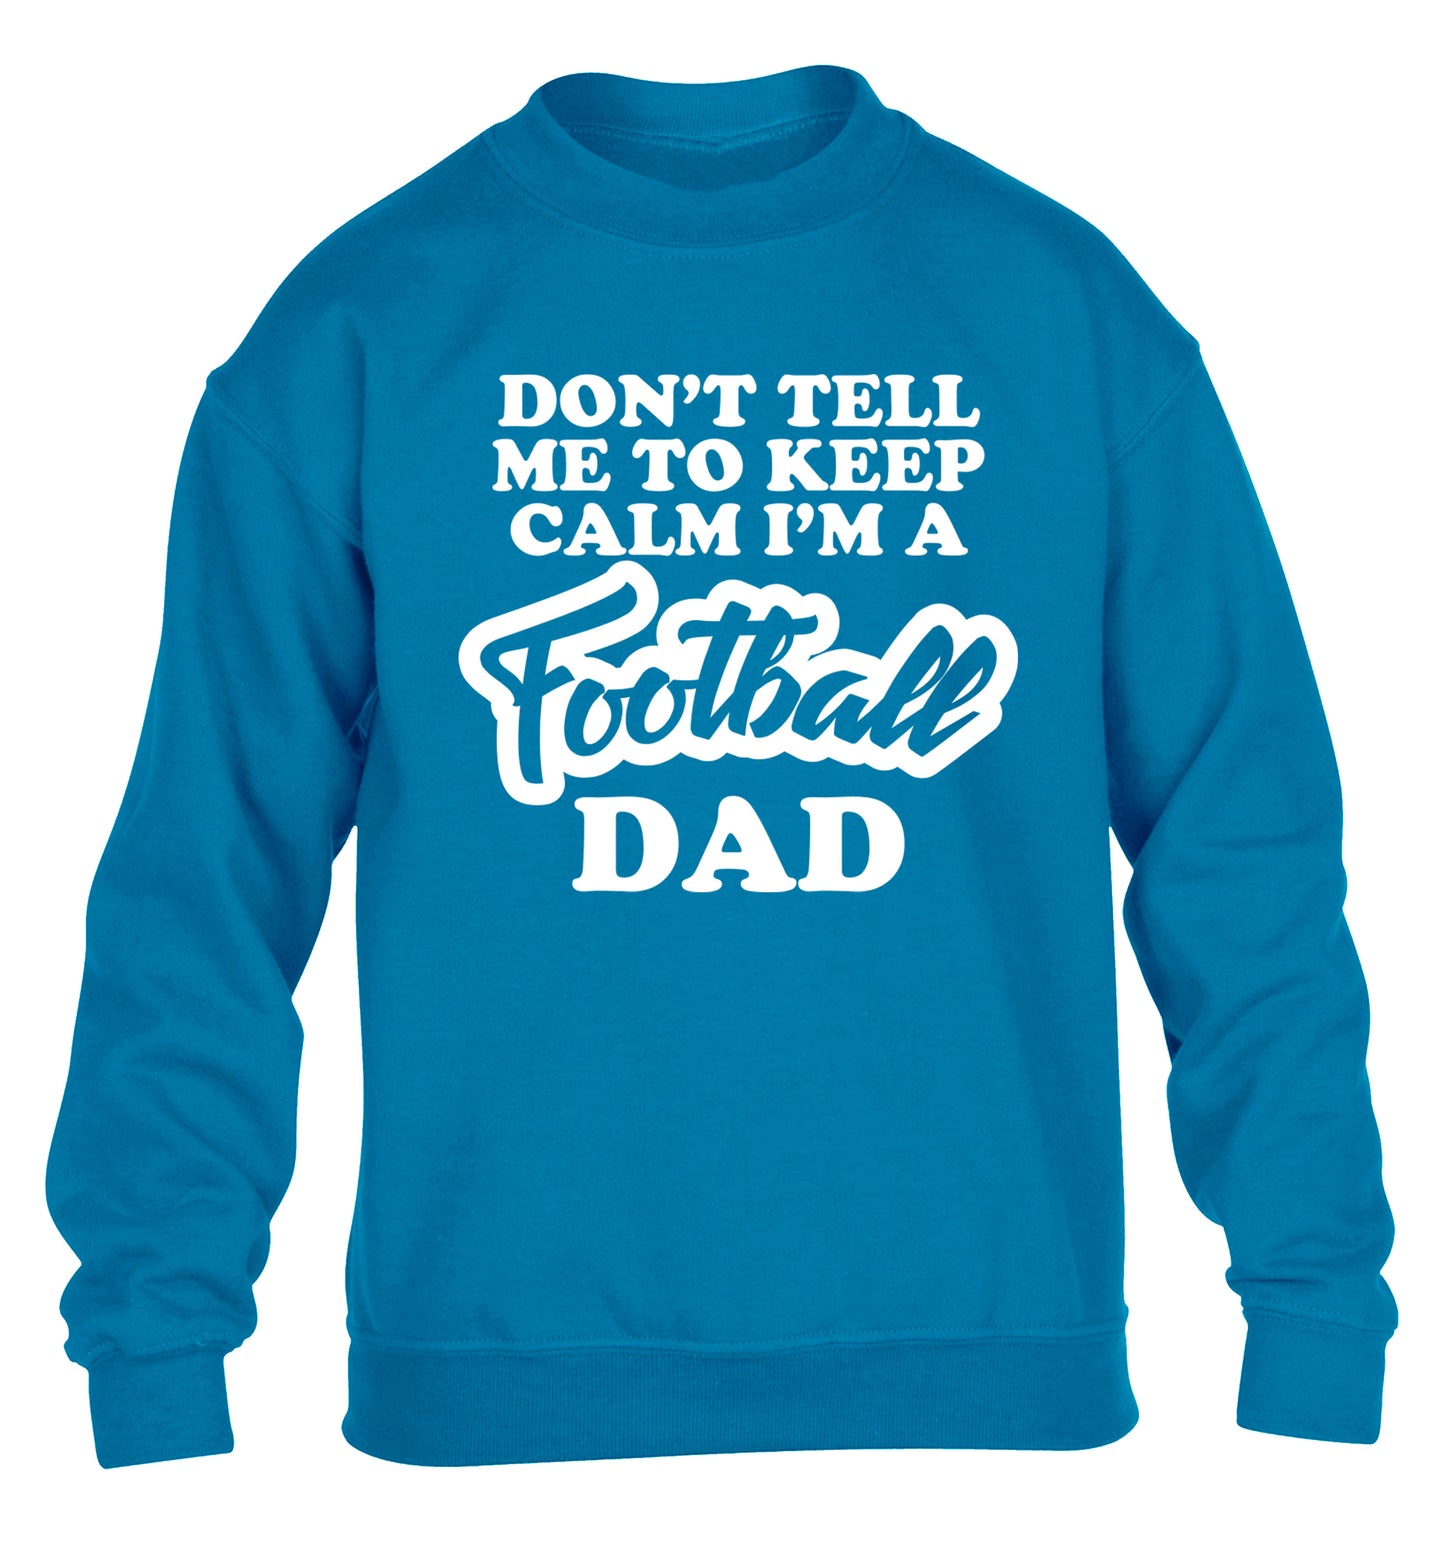 Don't tell me to keep calm I'm a football grandad children's blue sweater 12-14 Years